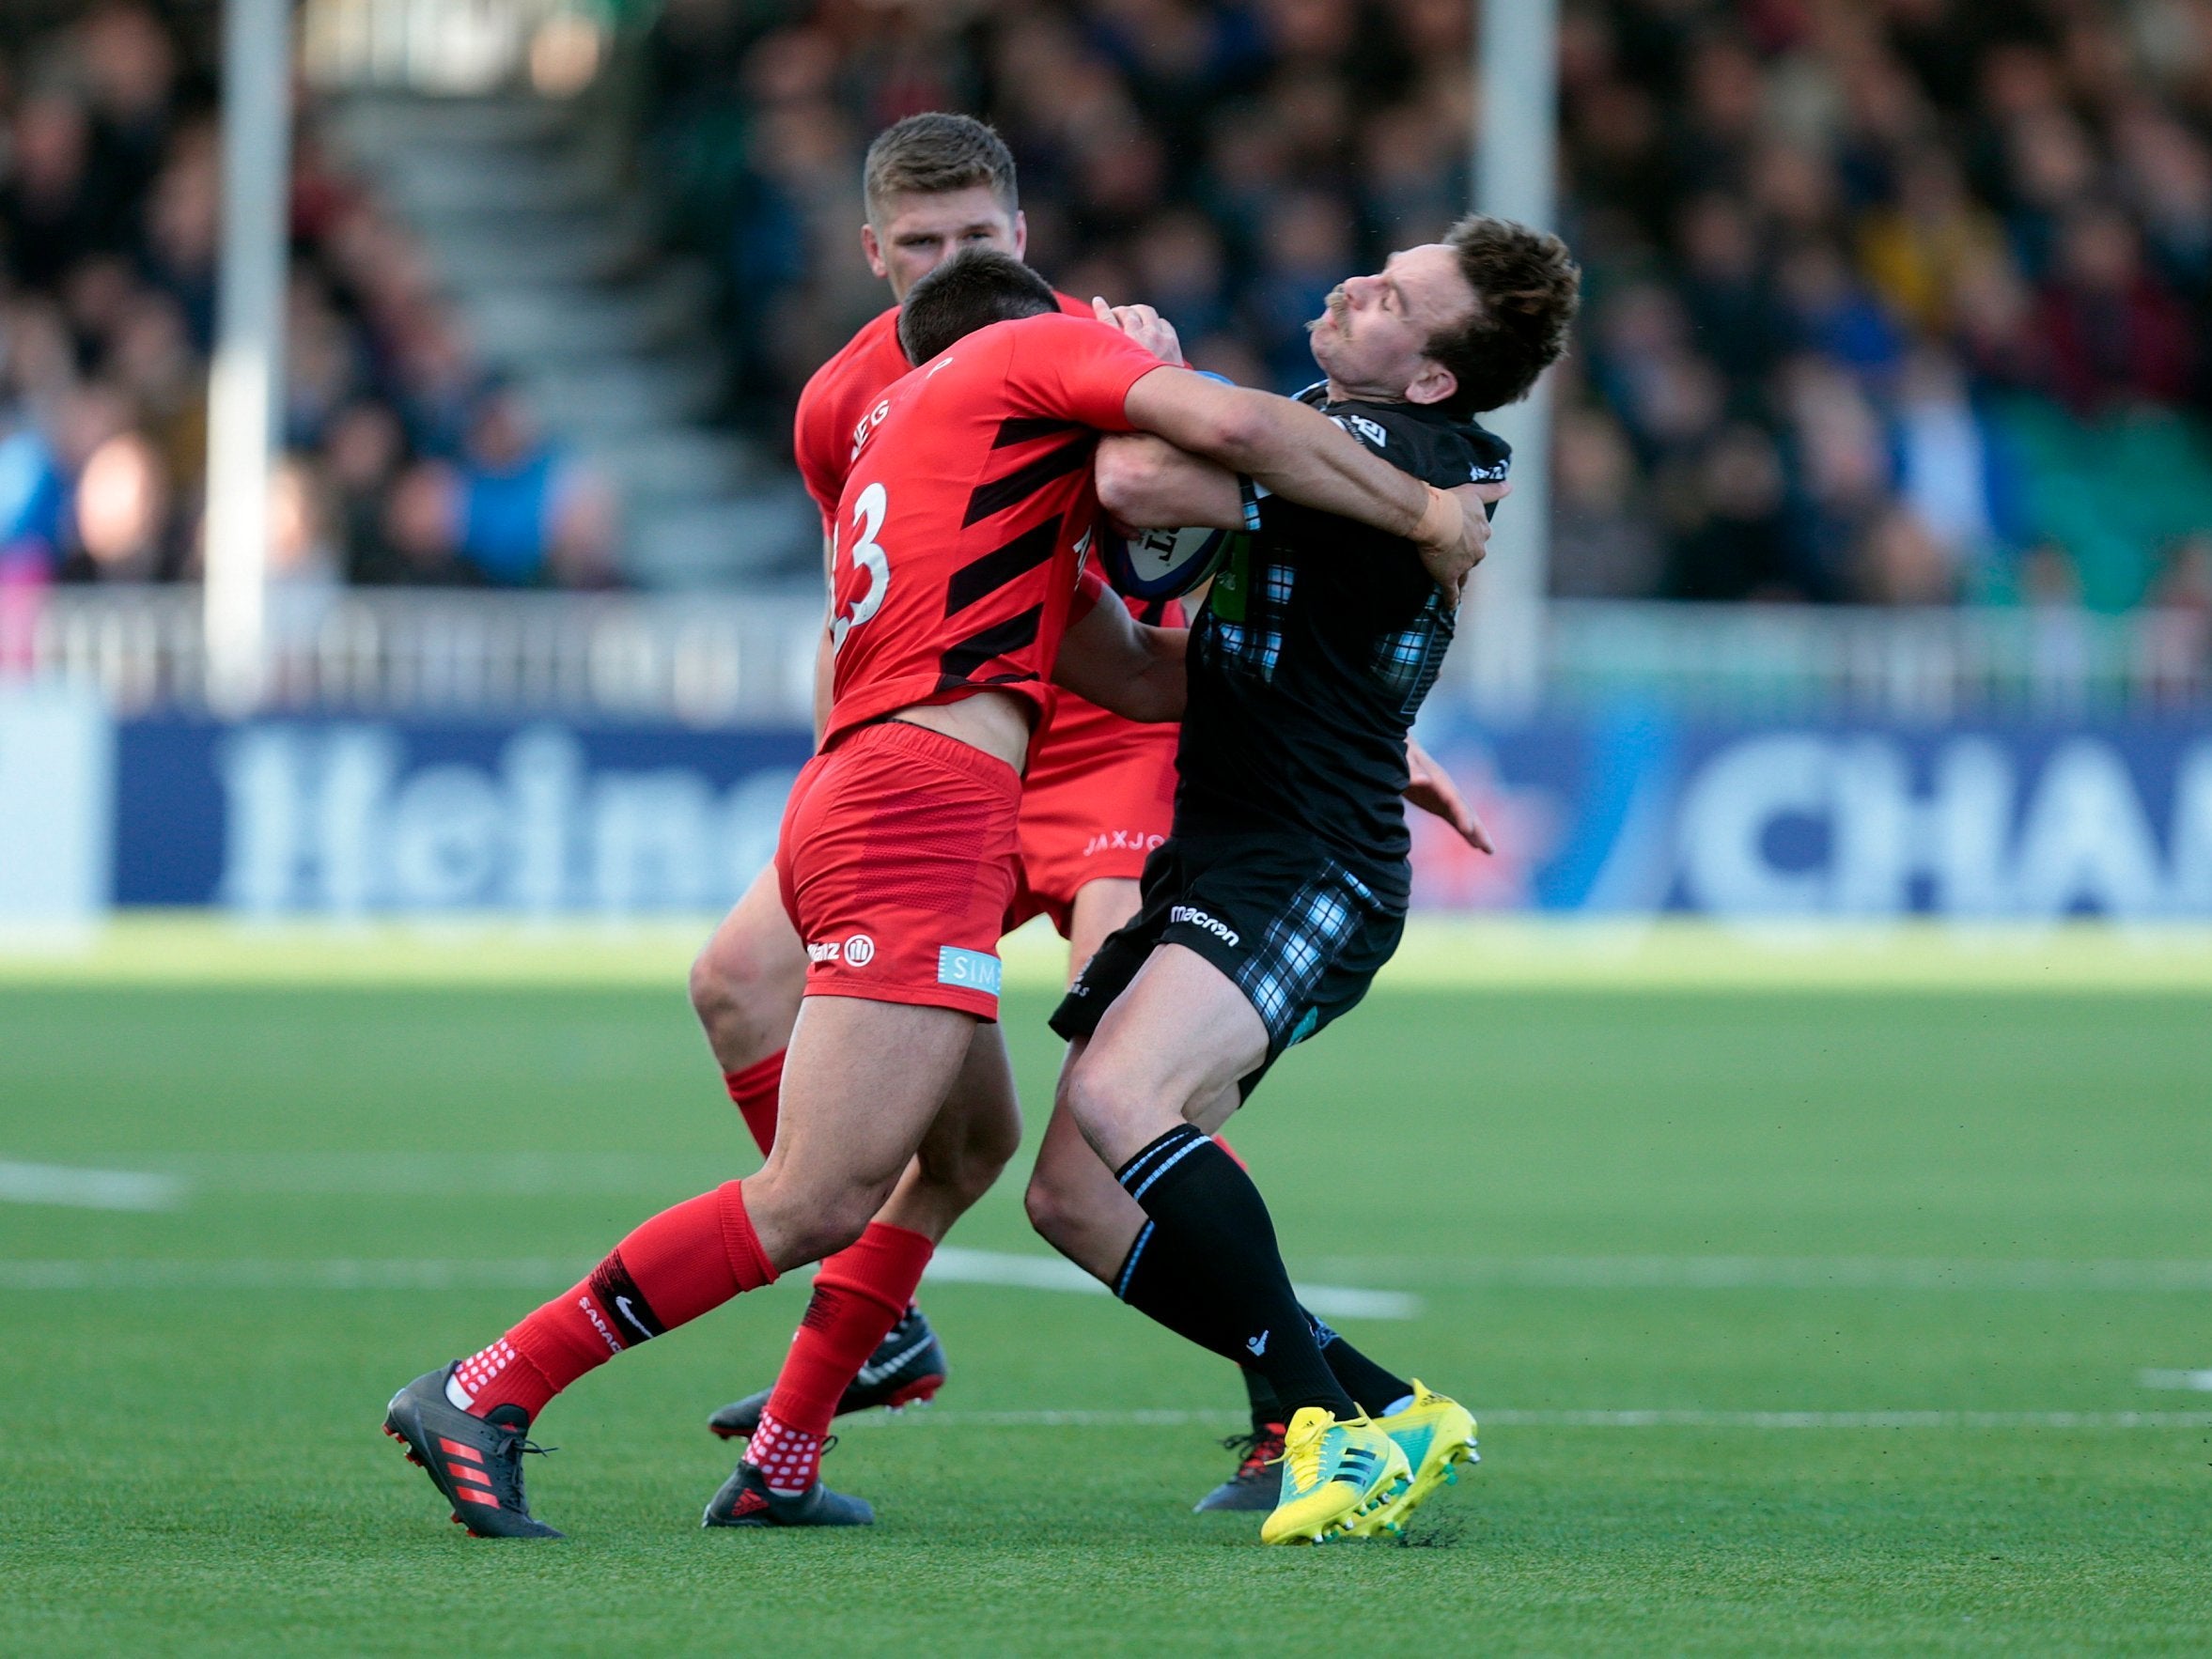 Lozowski cleared of a dangerous tackle on Glasgow full-back Jackson